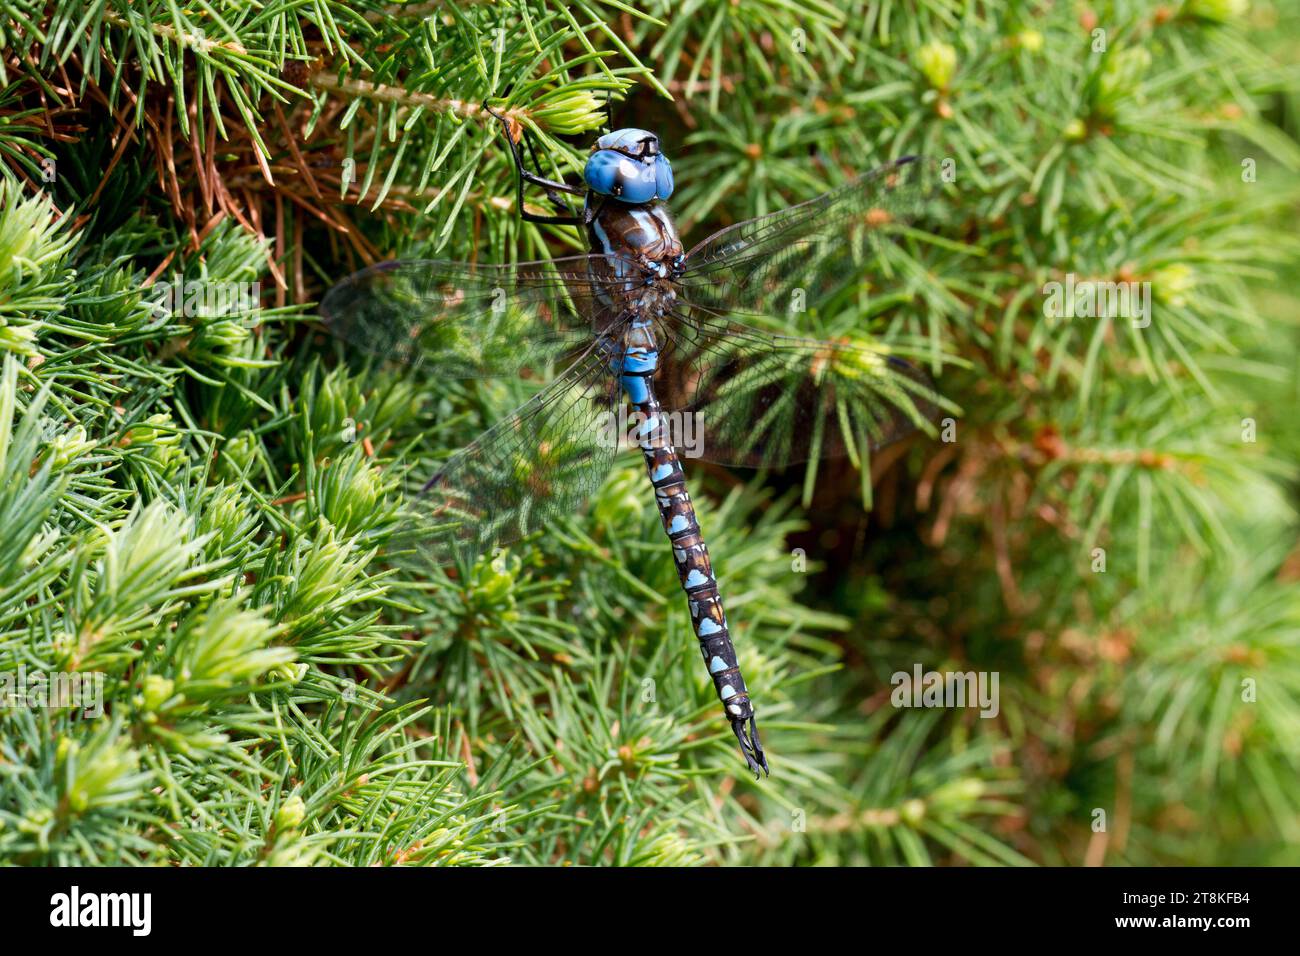 A Blue-eyed Darner Dragonfly (Aeshna multicolor) on a conifer in a garden in Nanaimo, BC, Vancouver Island, Canada in June Stock Photo